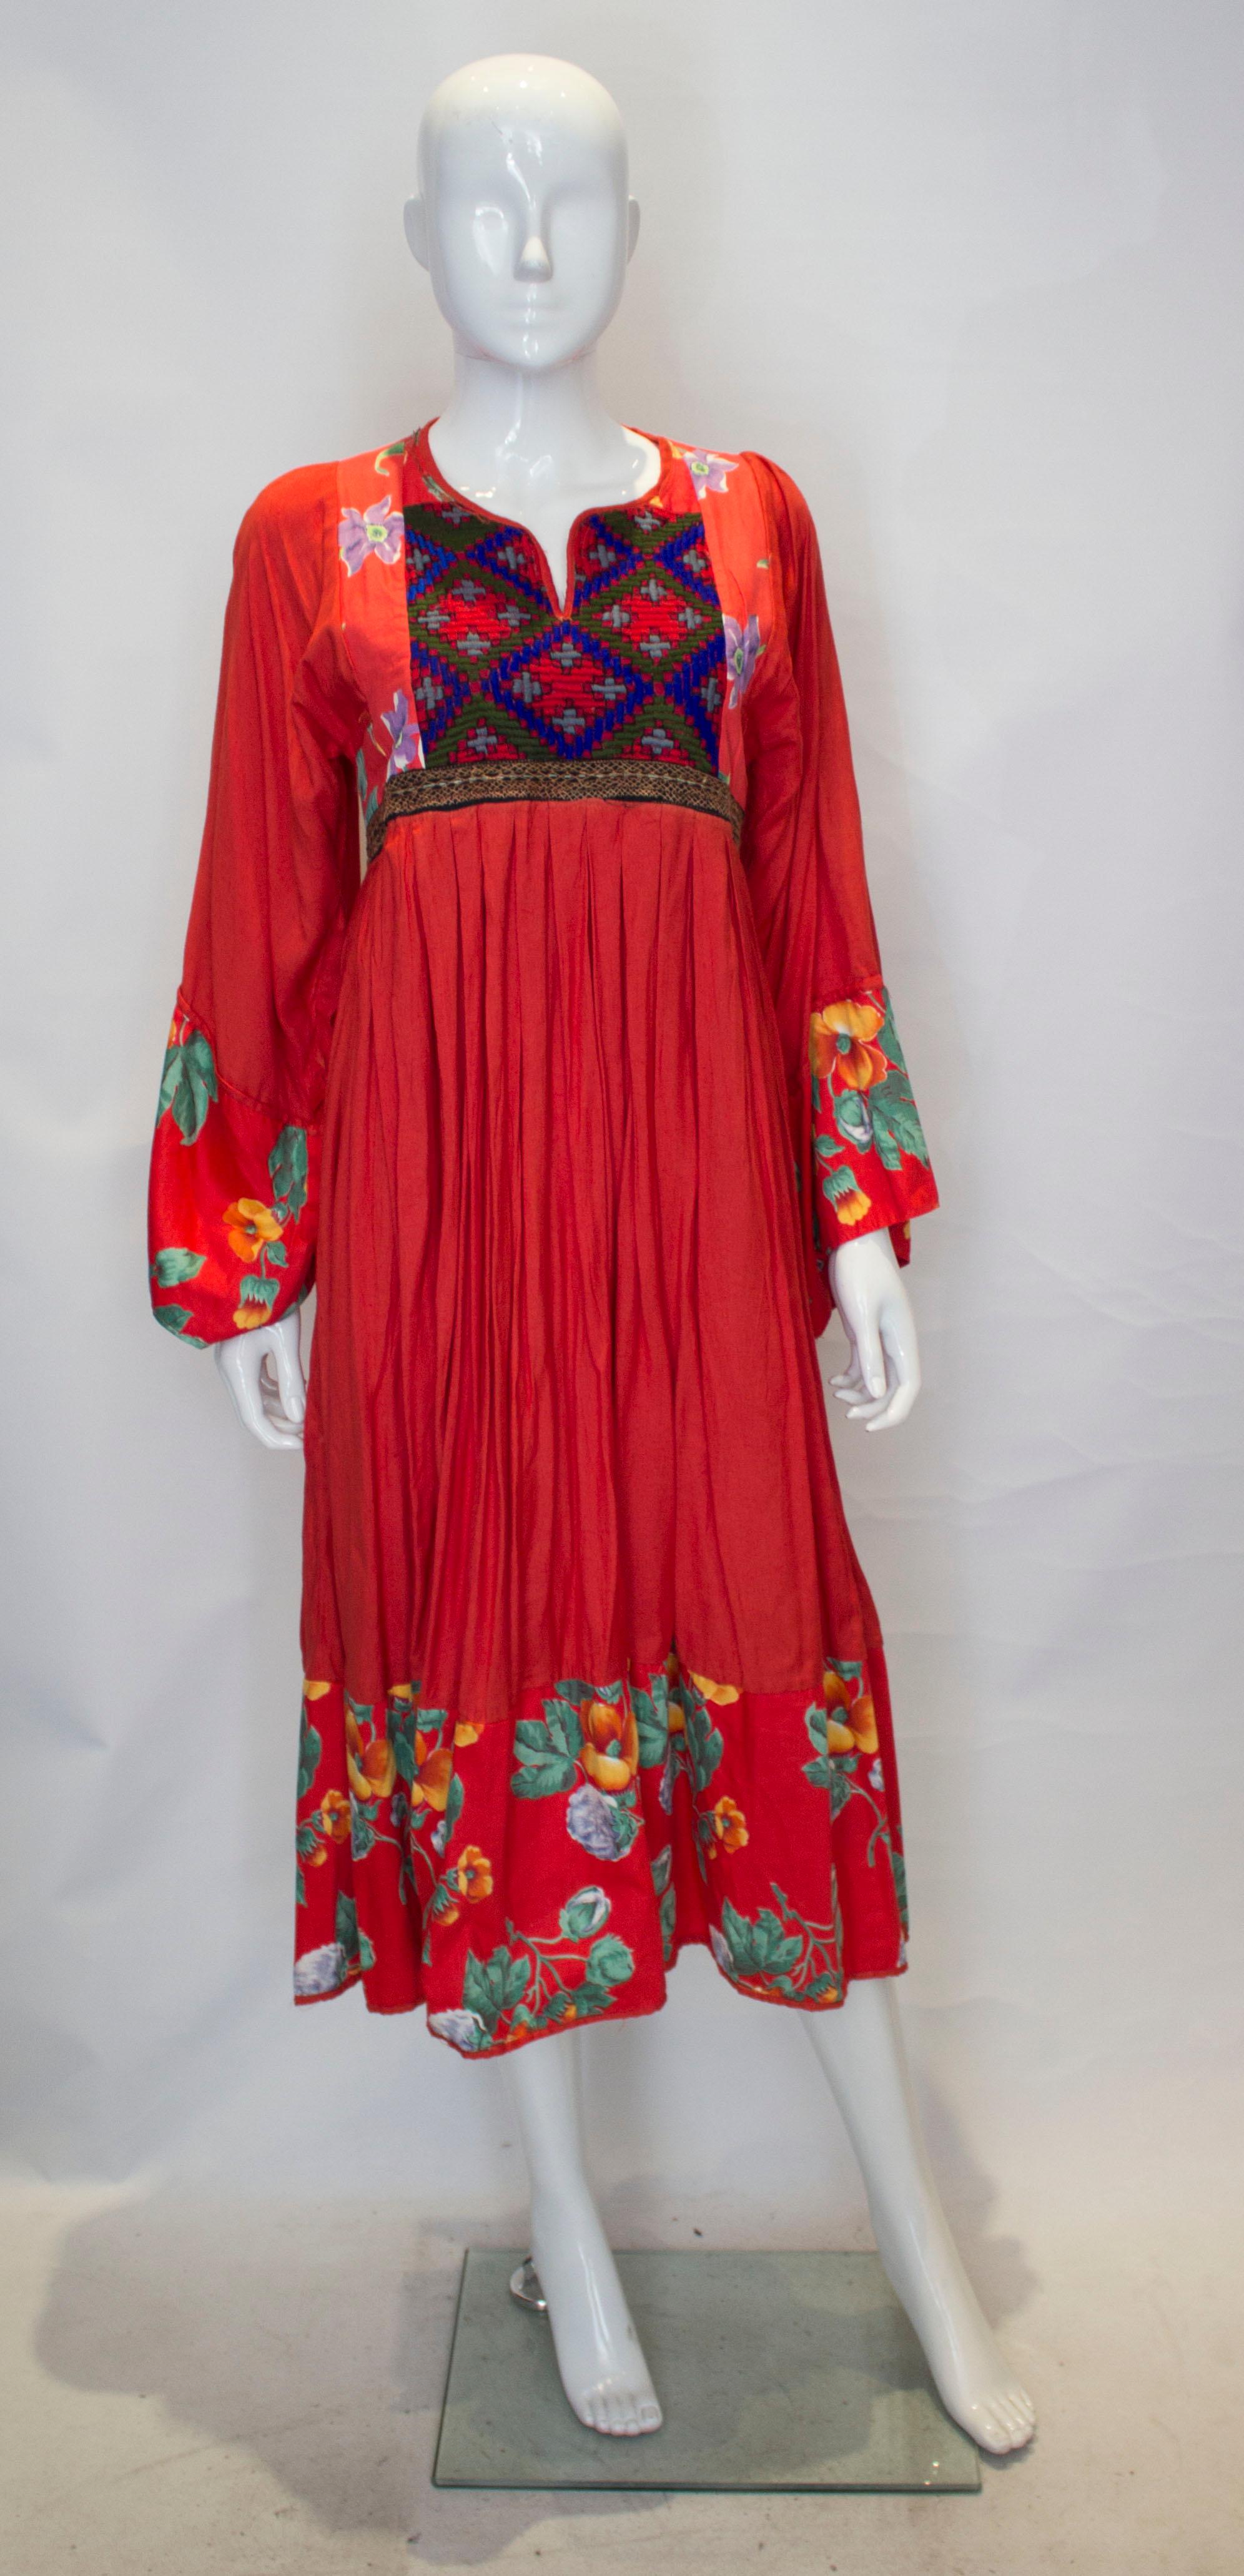 A fun easy to wear red cotton boho dress. The dress is collarless with a v neckline and has embroidery over the bust area with print cuffs  and hem.